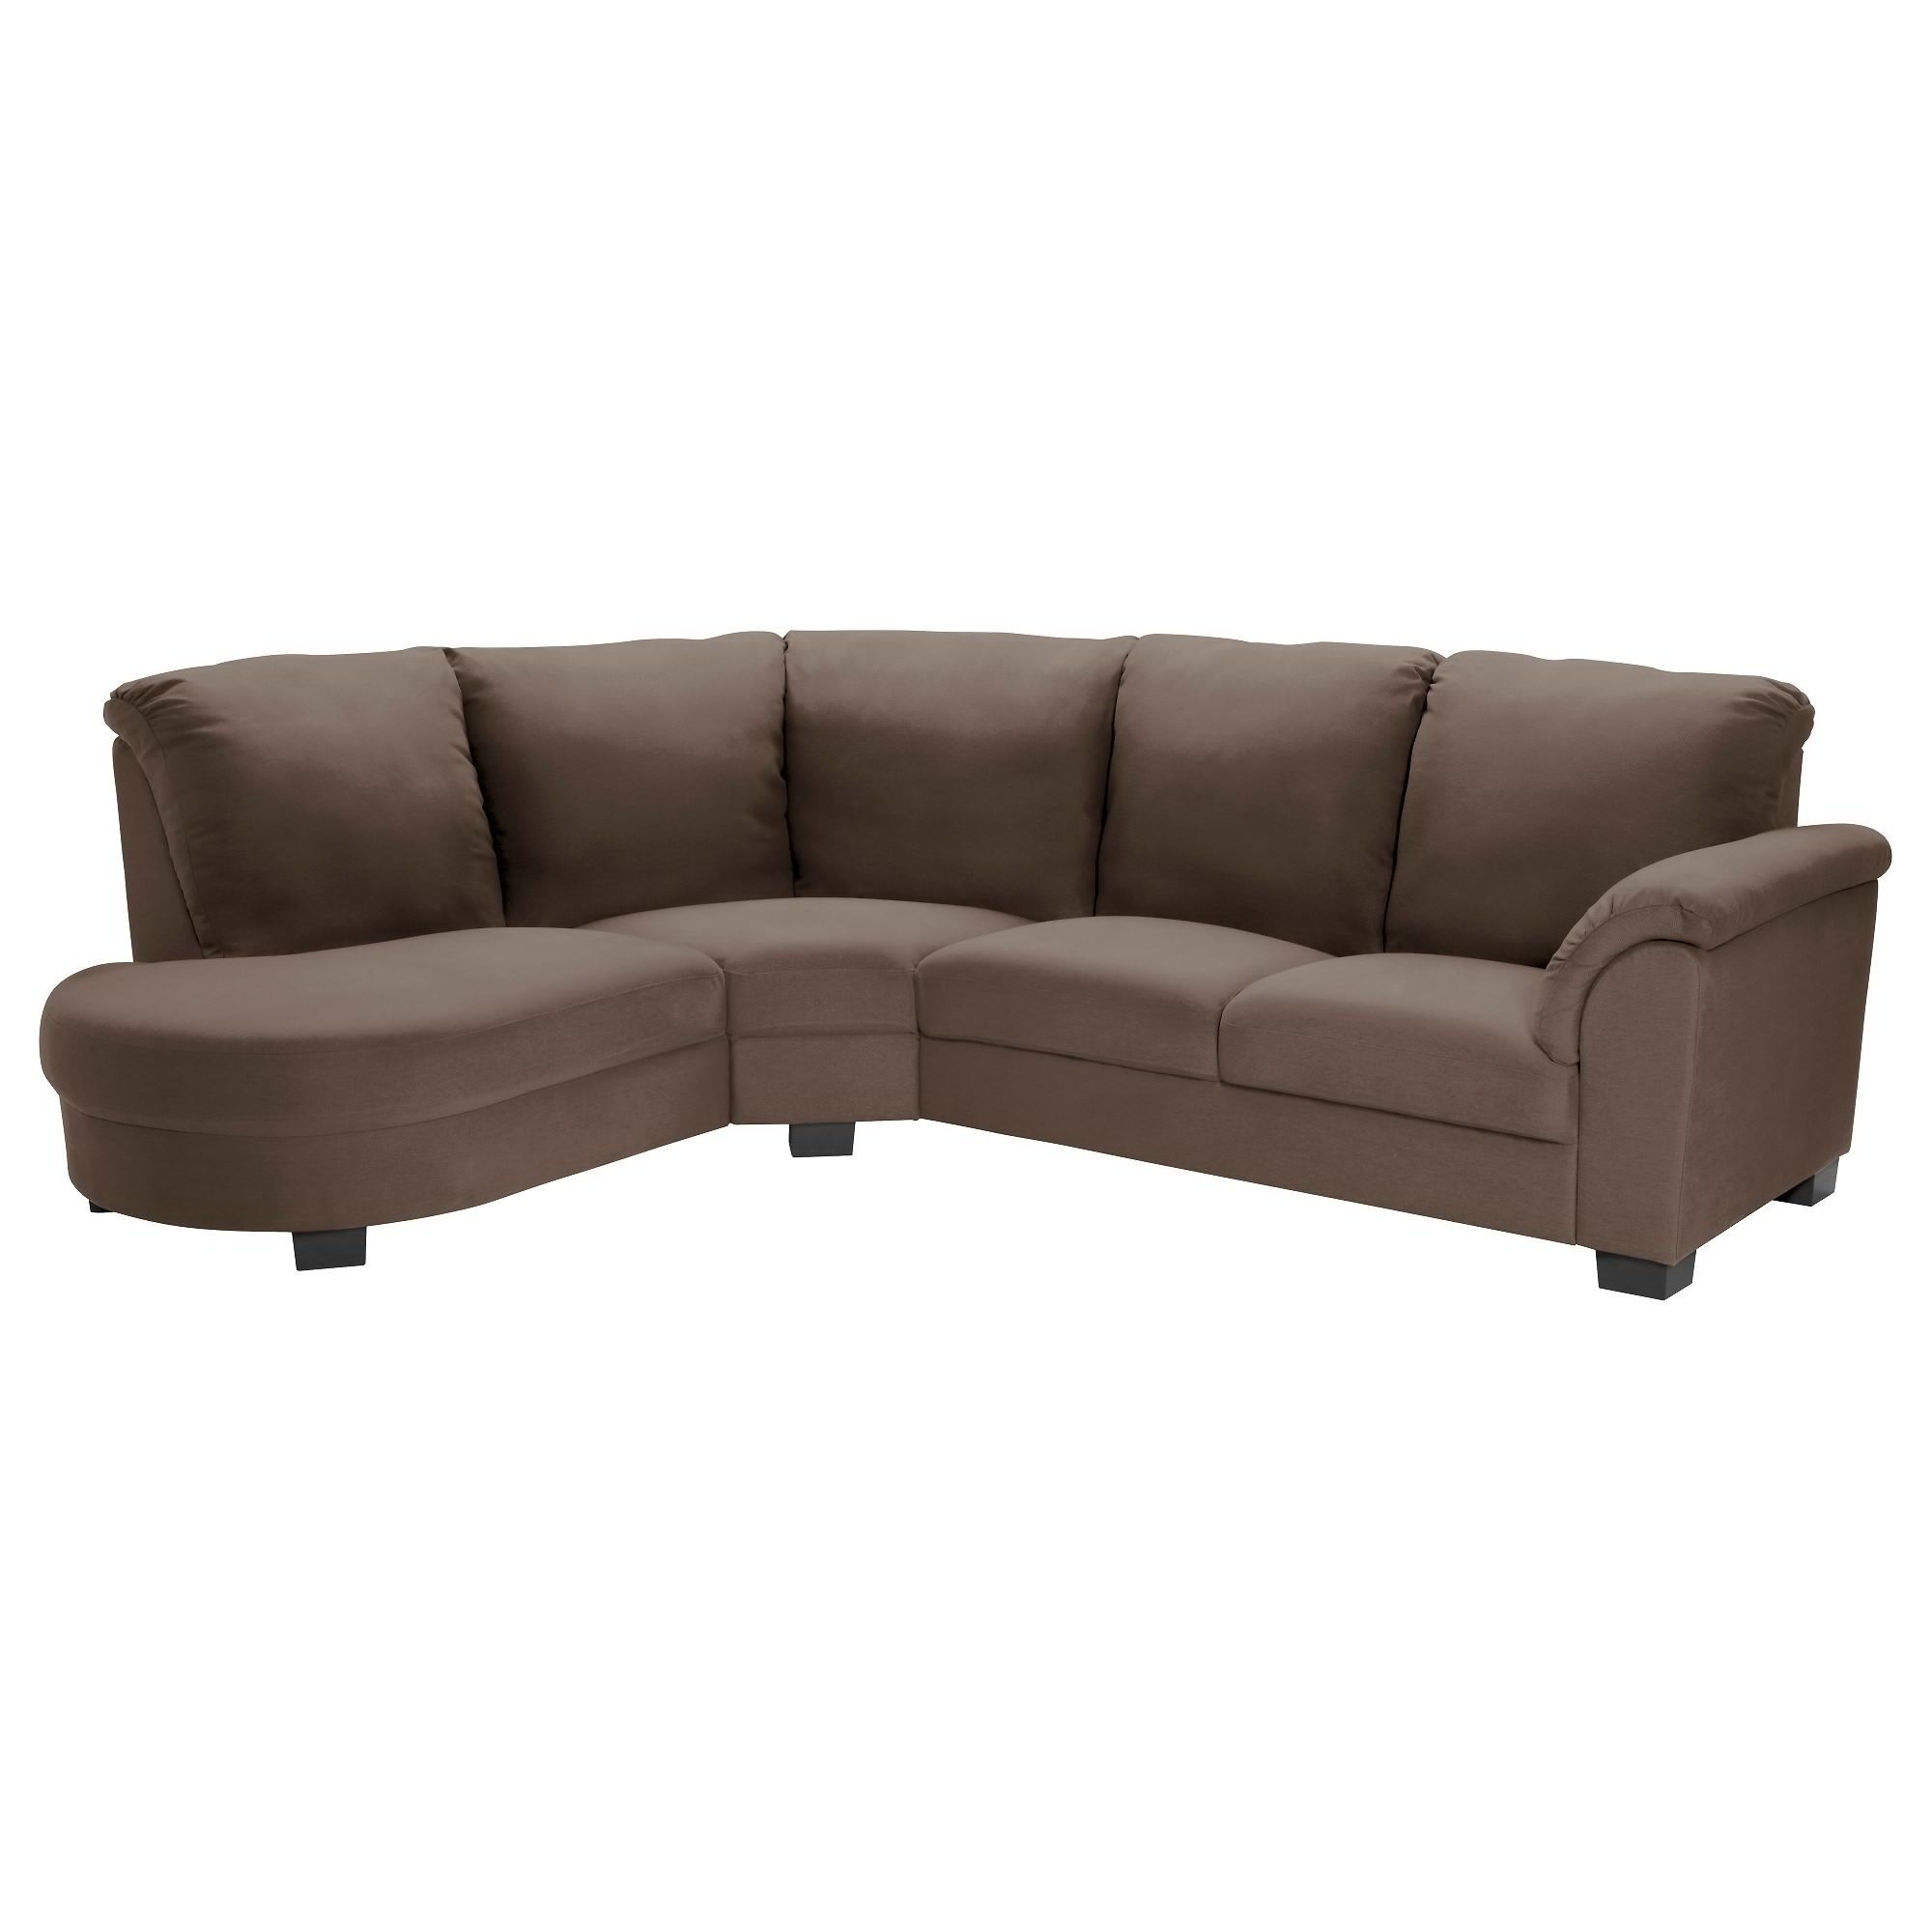 Well Known Sectional Sofas At Ikea With Regard To Sectional Sofa Design: Corner Sectional Sofa Slipcovers Lamps (View 14 of 15)